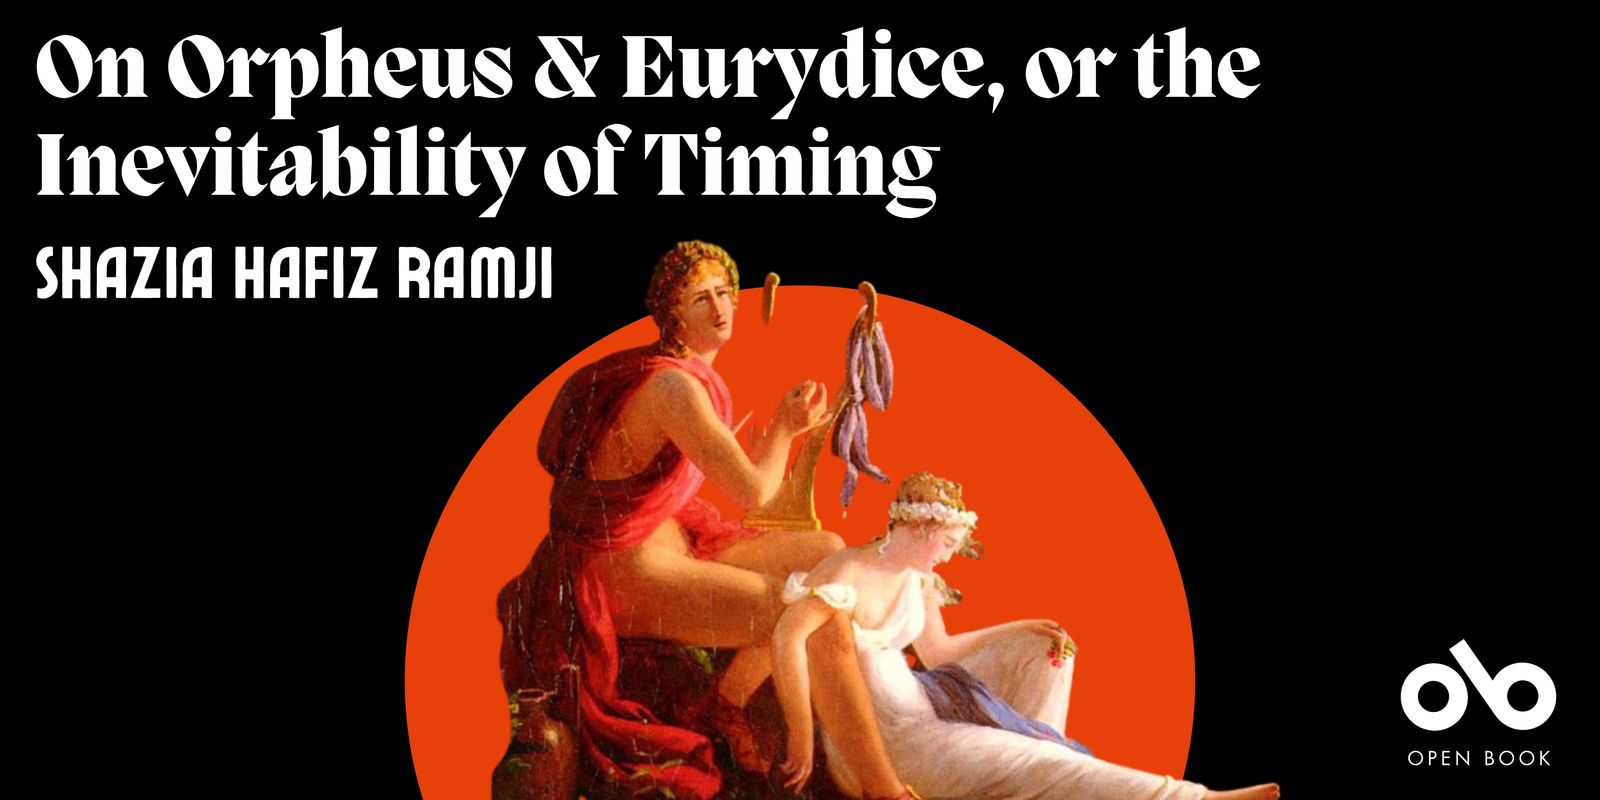 On Orpheus & Eurydice, or the Inevitability of Timing